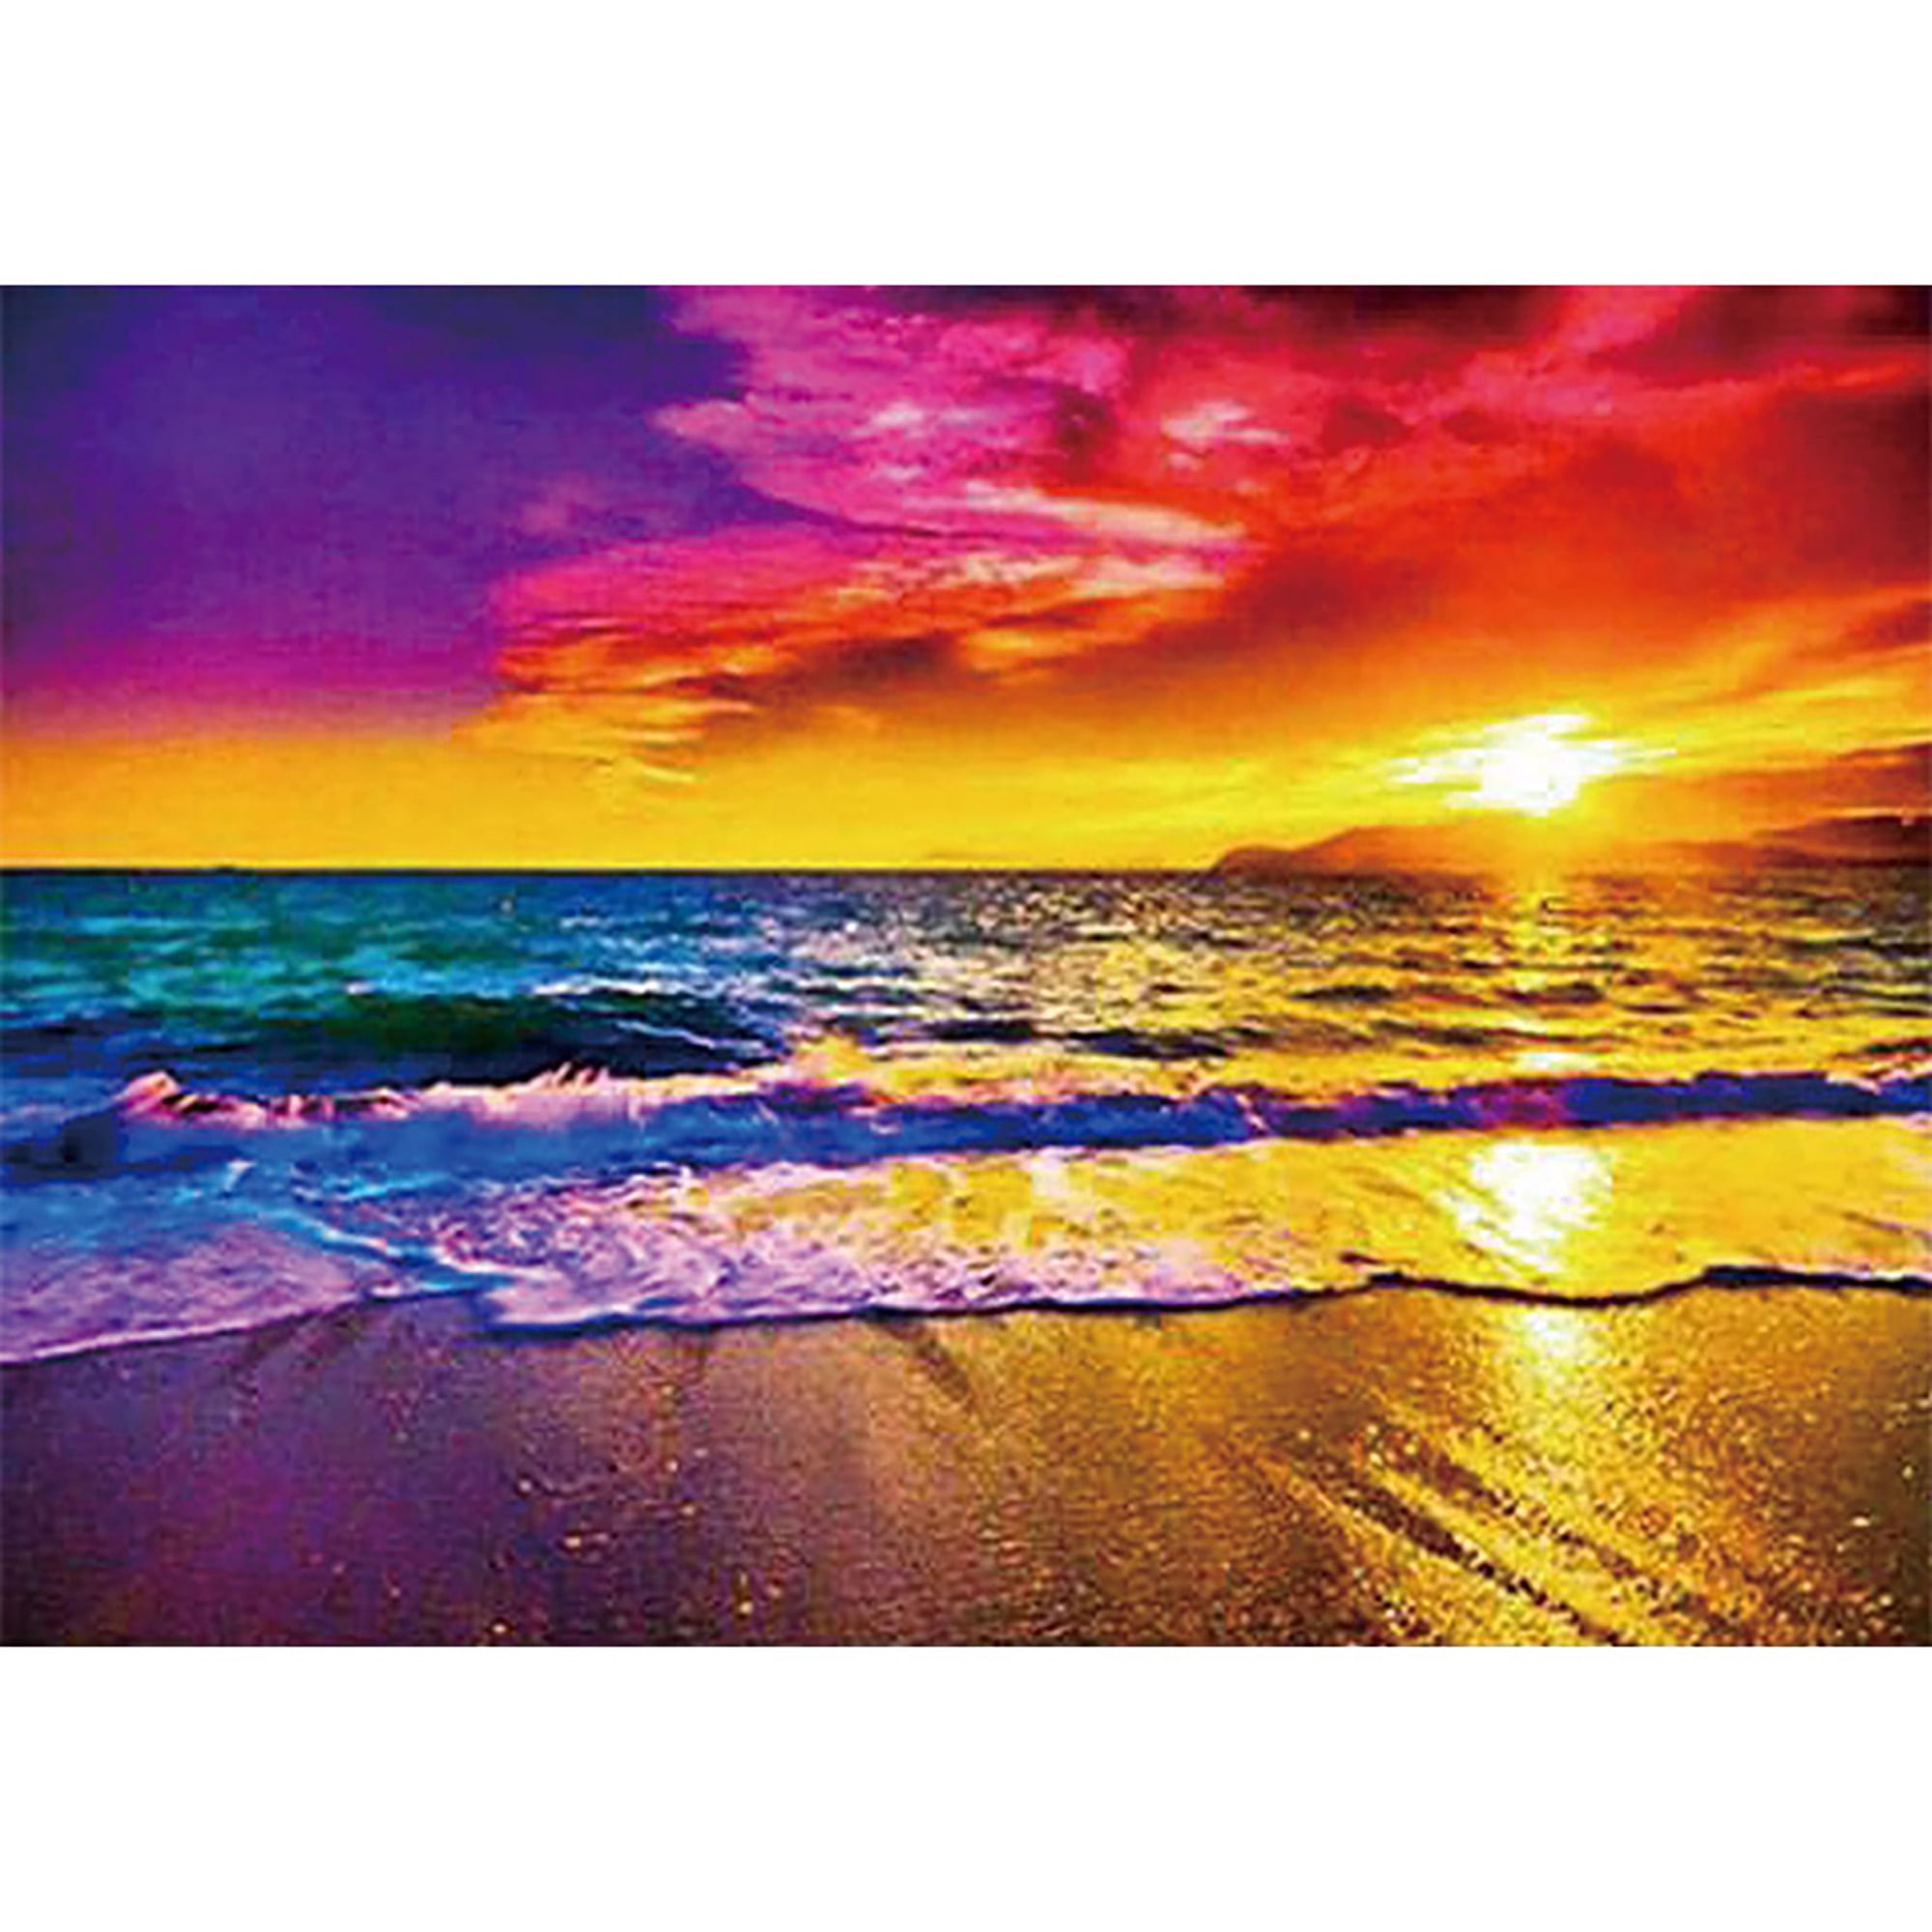 Sunset Time Full Drill 5D Diamond Painting Kits Embroidery Cross Crafts Stitch 